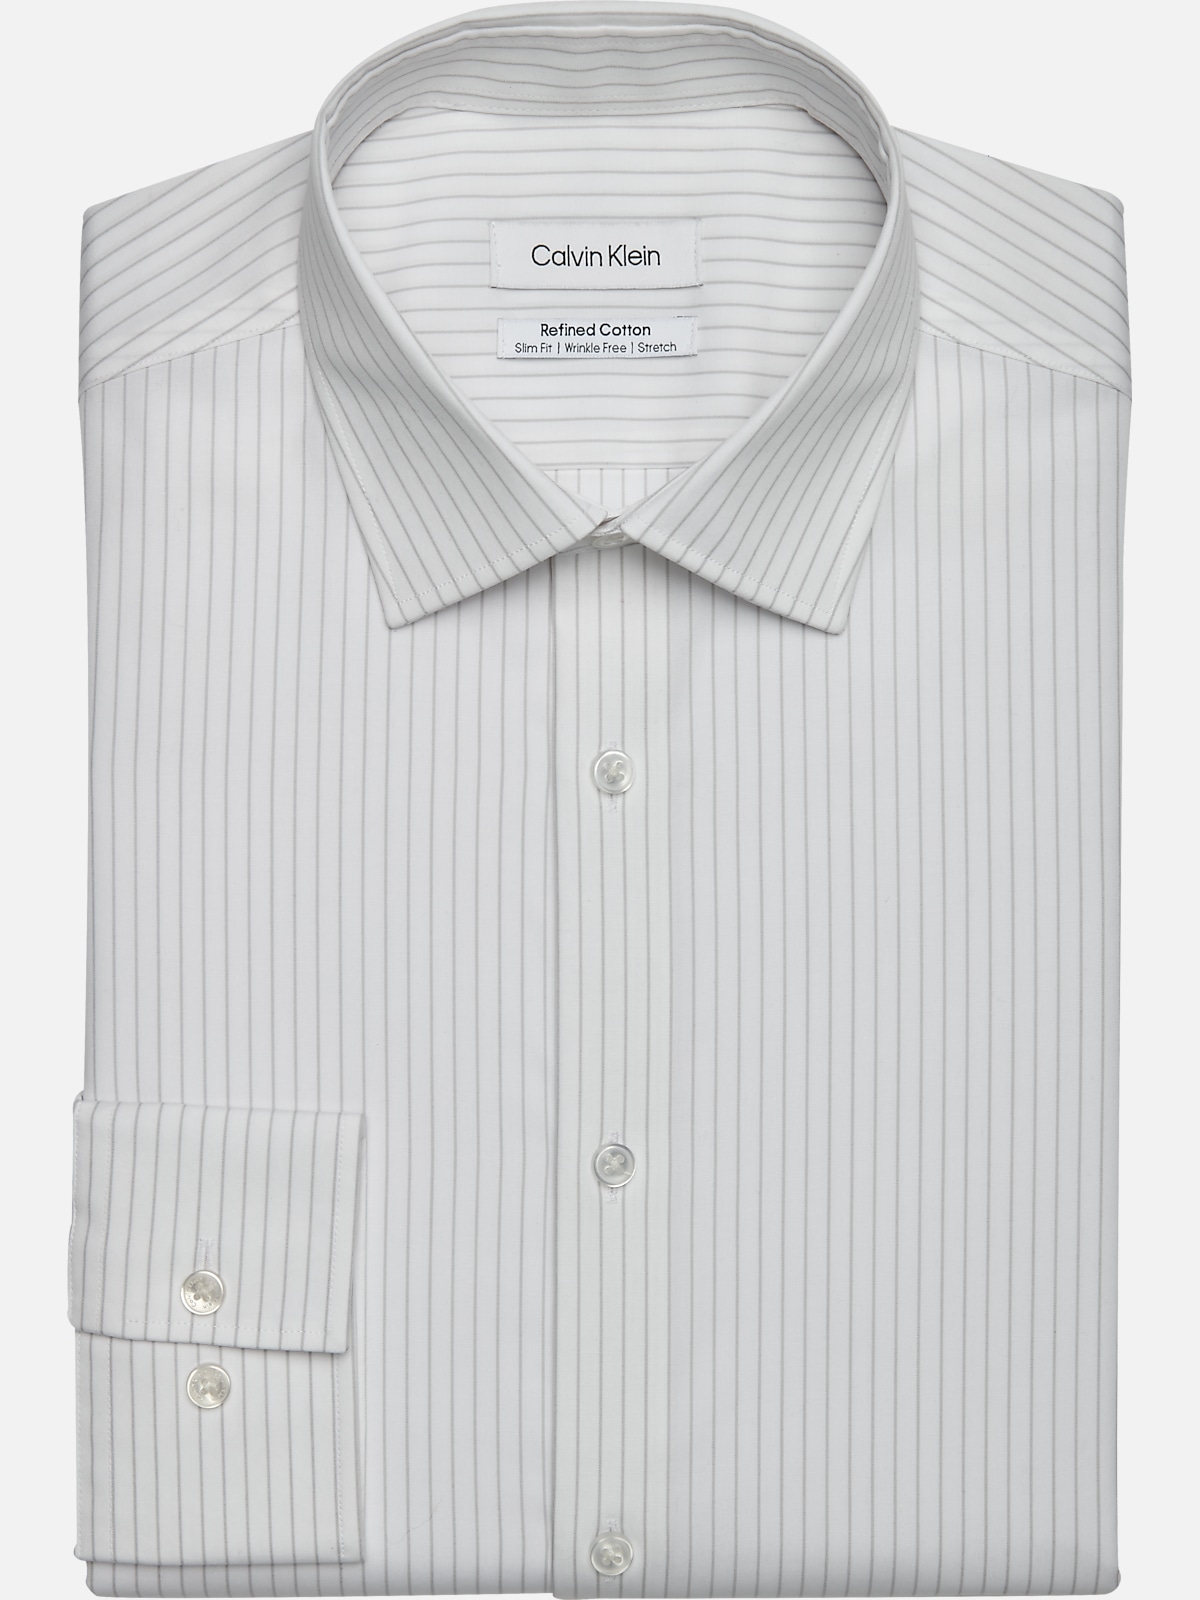 https://image.menswearhouse.com/is/image/TMW/TMW_5FK7_34_CALVIN_KLEIN_DRESS_SHIRTS_GRAY_STRIPE_MAIN?imPolicy=pdp-zoom-mob